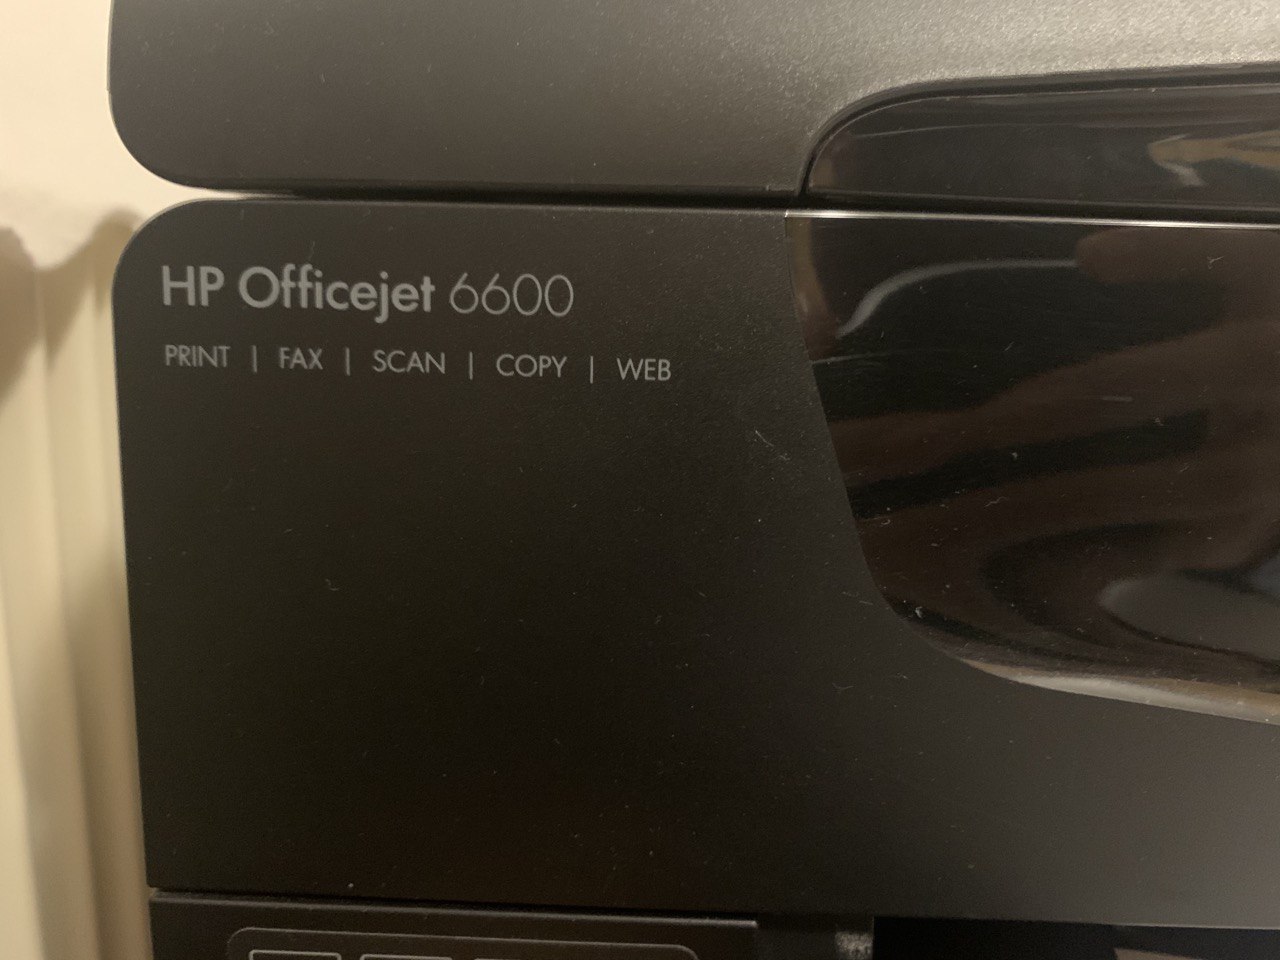 HP Officejet 6600 NOT scan - HP Support Community -